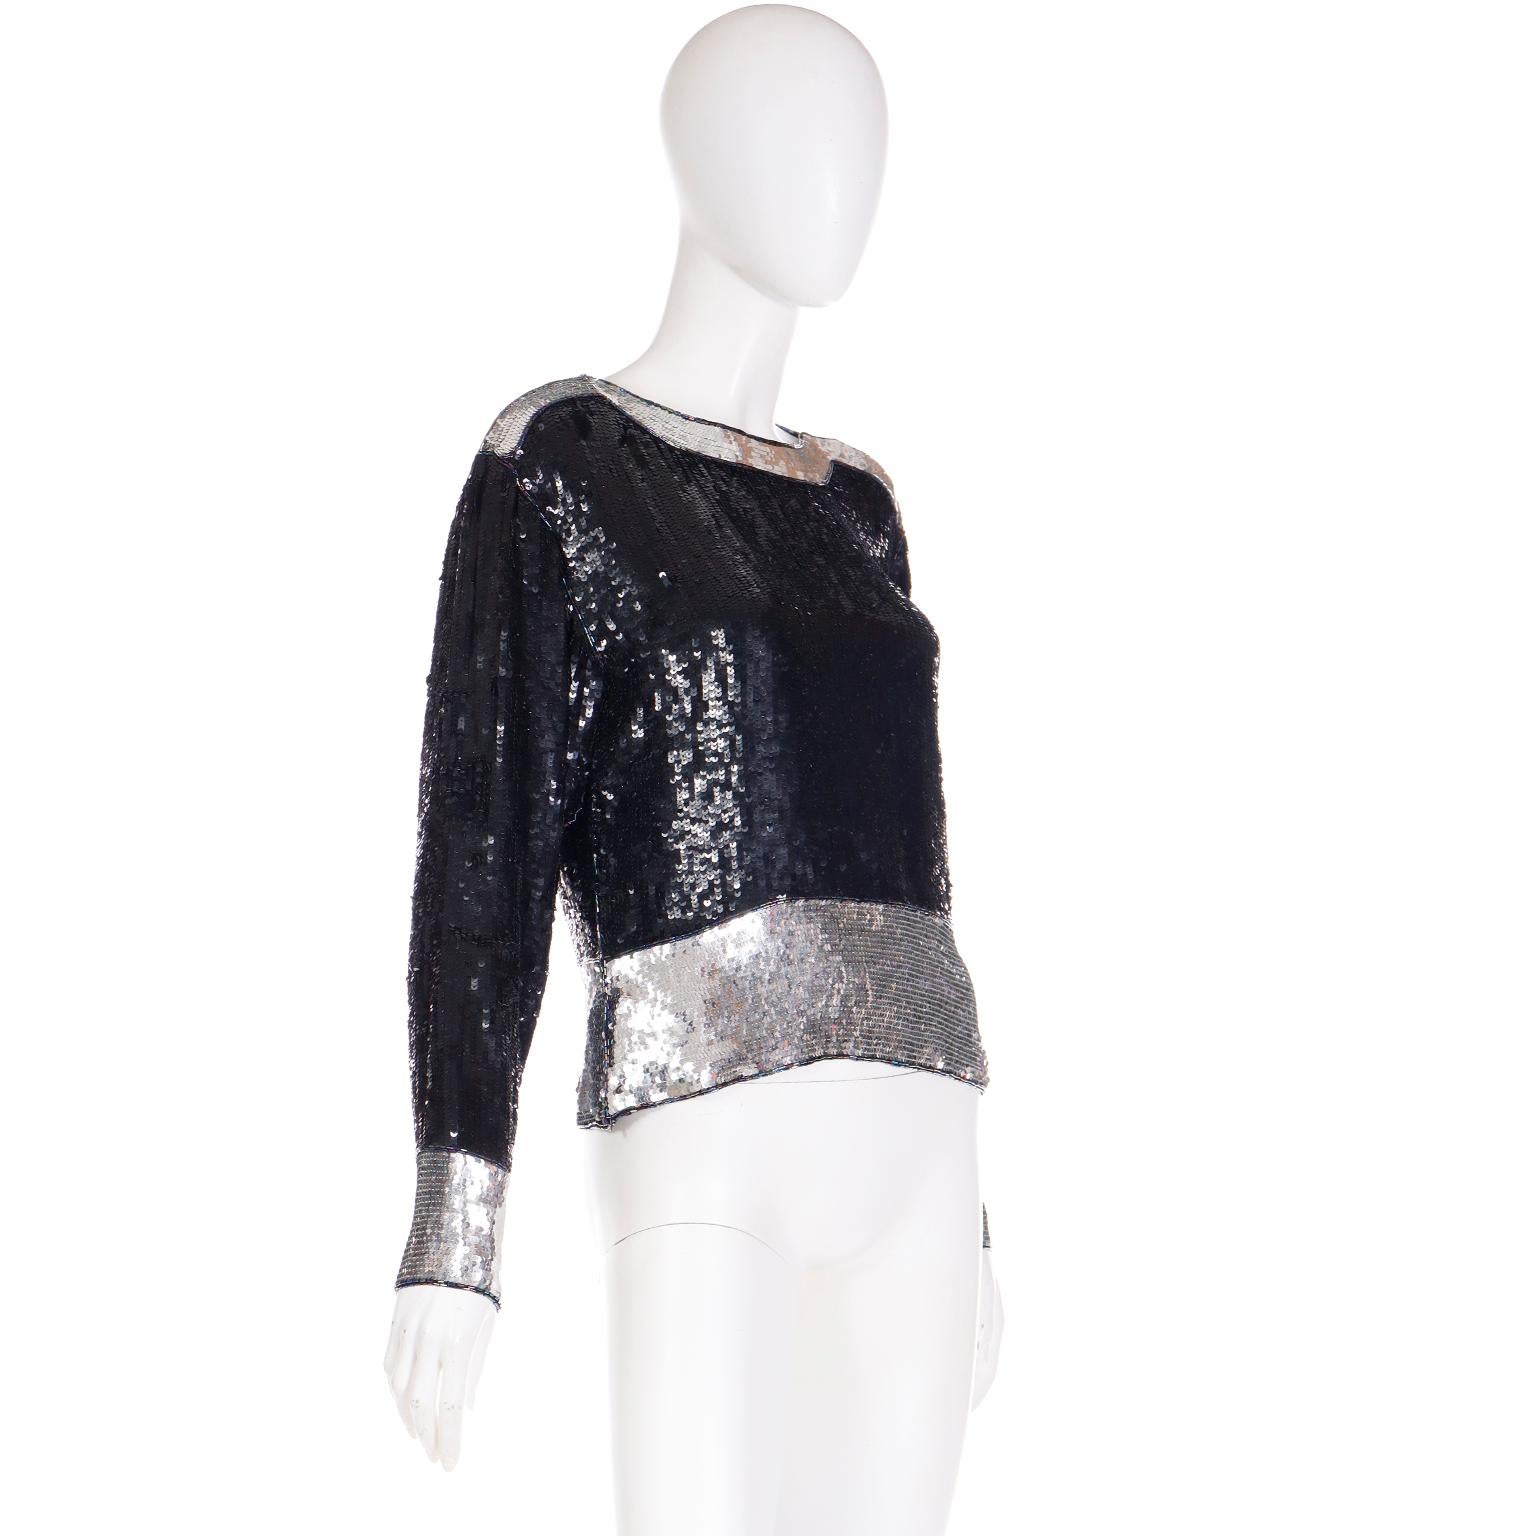 1970s Yves Saint Laurent Vintage Black & Silver Beaded Top W Beads & Sequins In Excellent Condition For Sale In Portland, OR